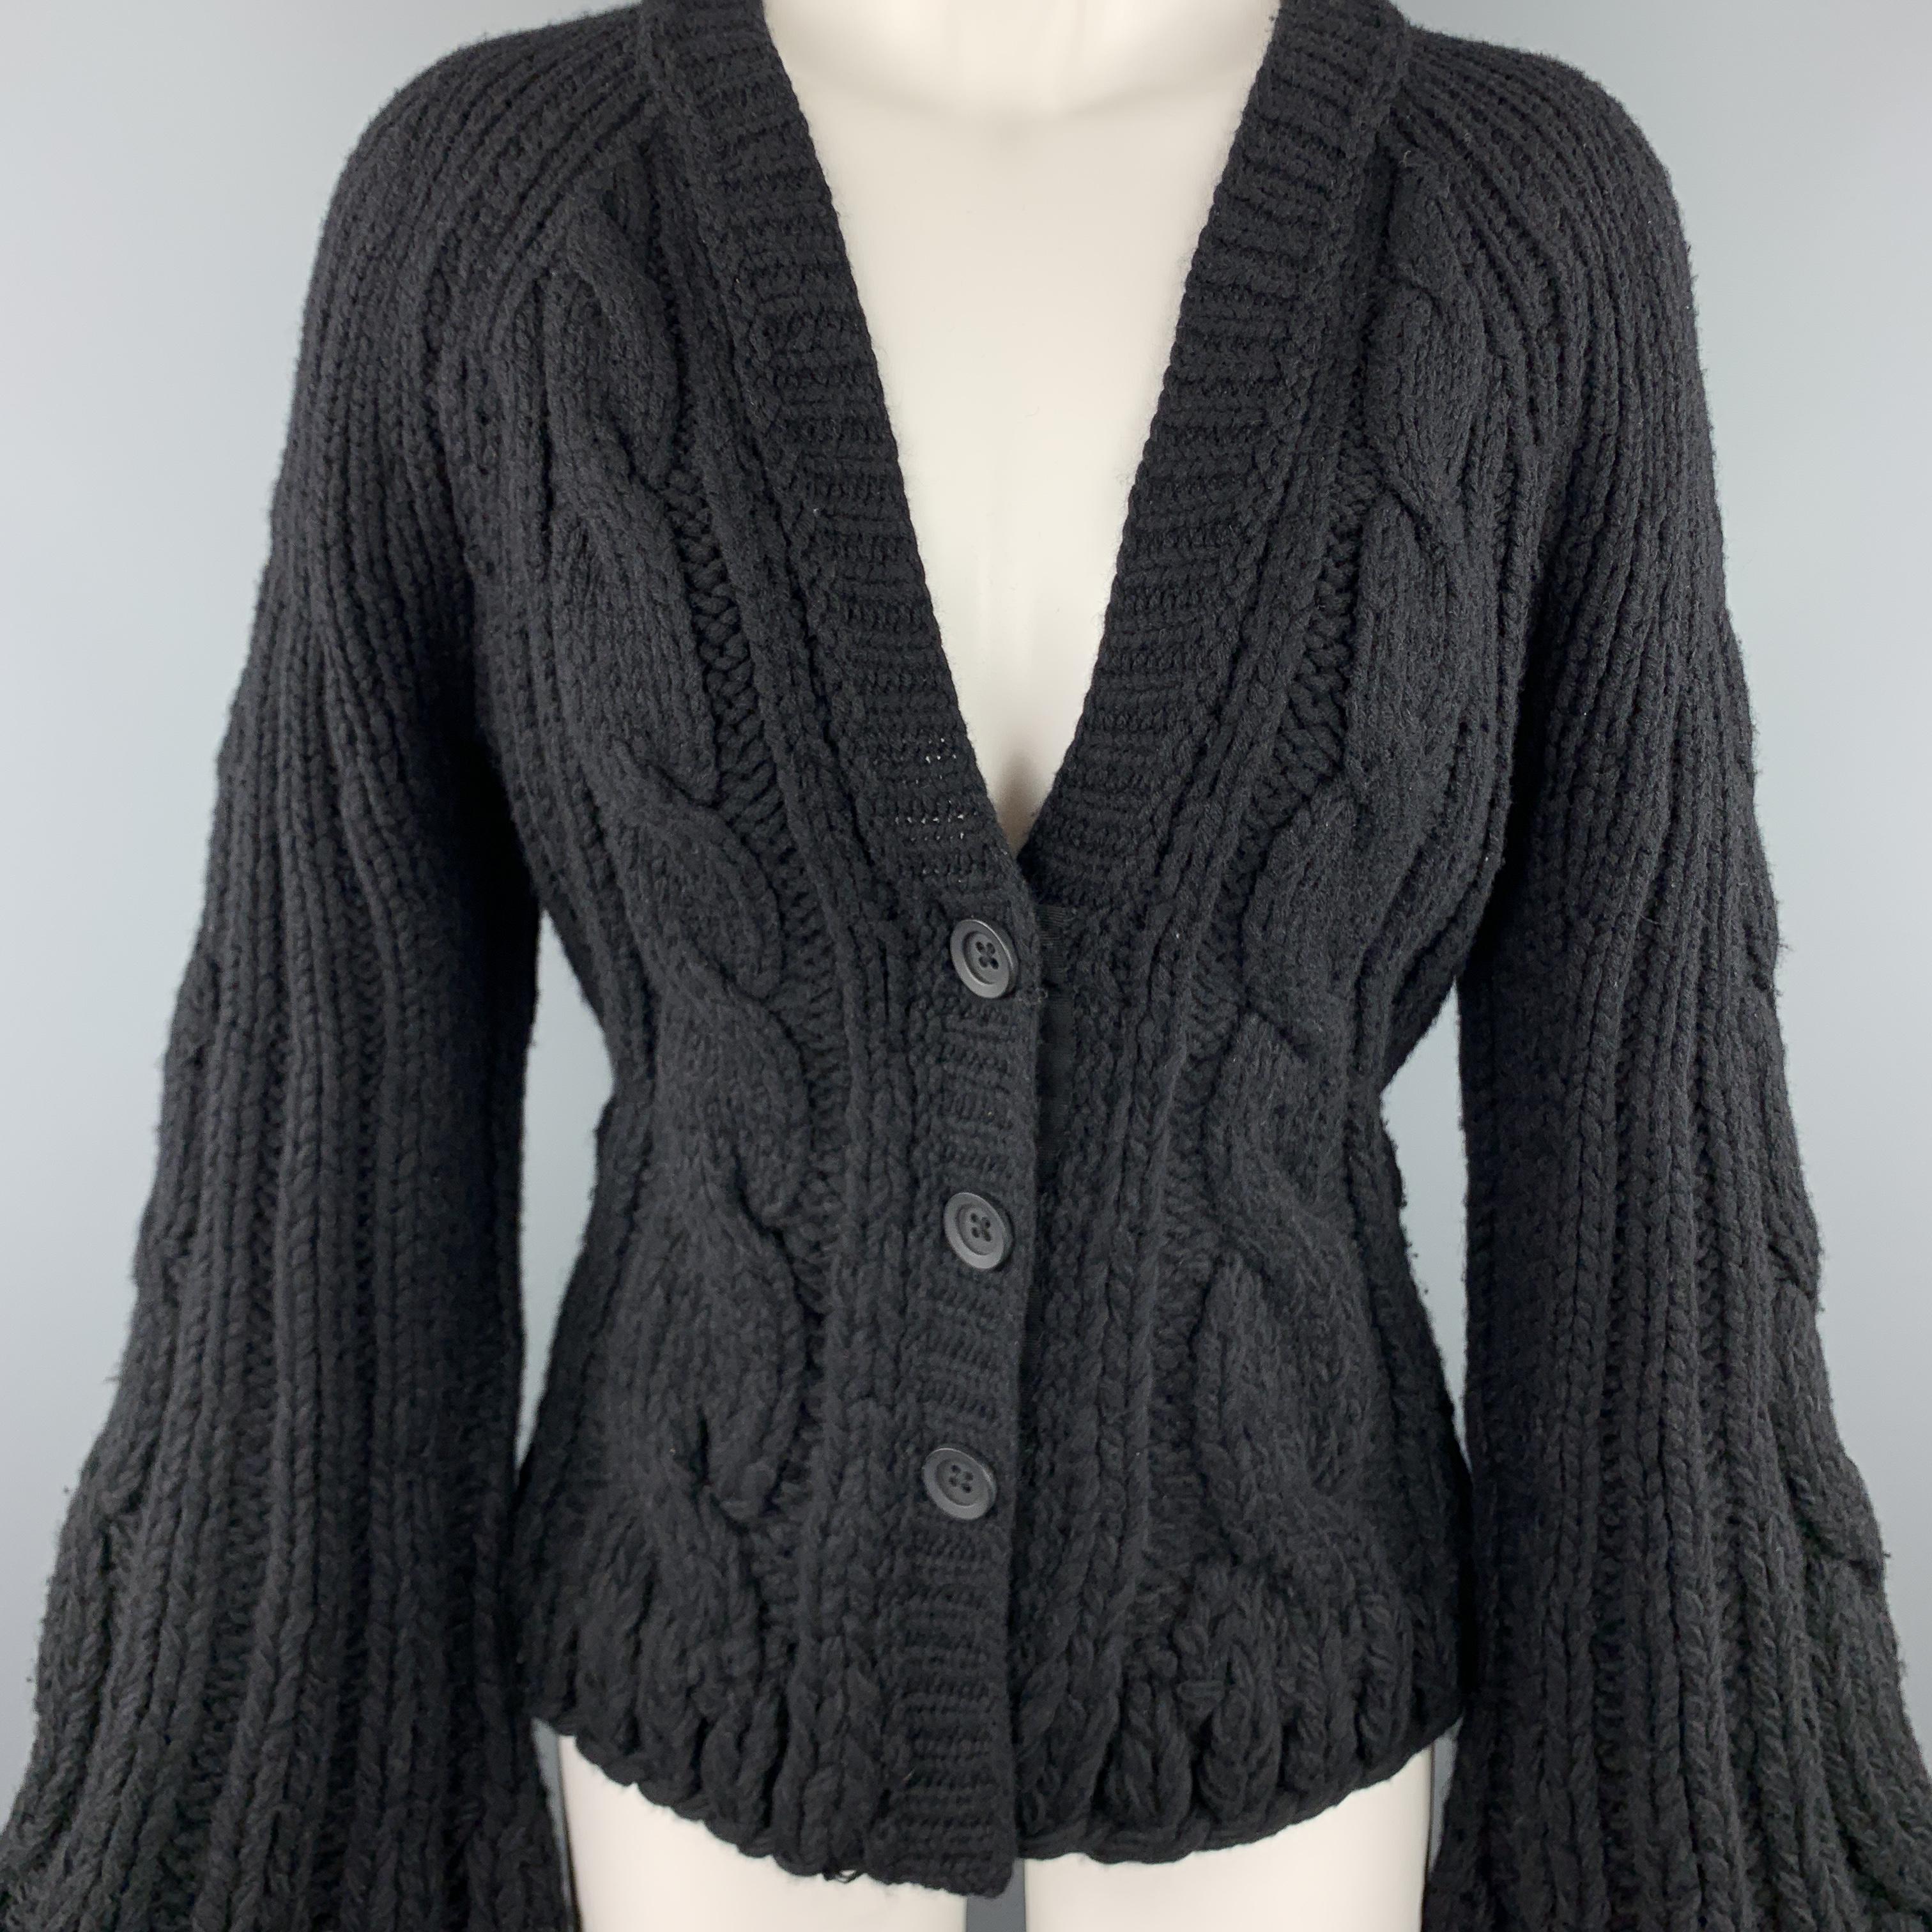 KAUFMAN FRANCO cardigan jacket comes in chunky wool cashmere blend cable knit with a v neck, snap closures, and bell sleeves. Wear throughout. As-is. 

Good Pre-Owned Condition.
Marked: M

Measurements:

Shoulder: 16 in.
Bust: 18 in.
Sleeve: 28